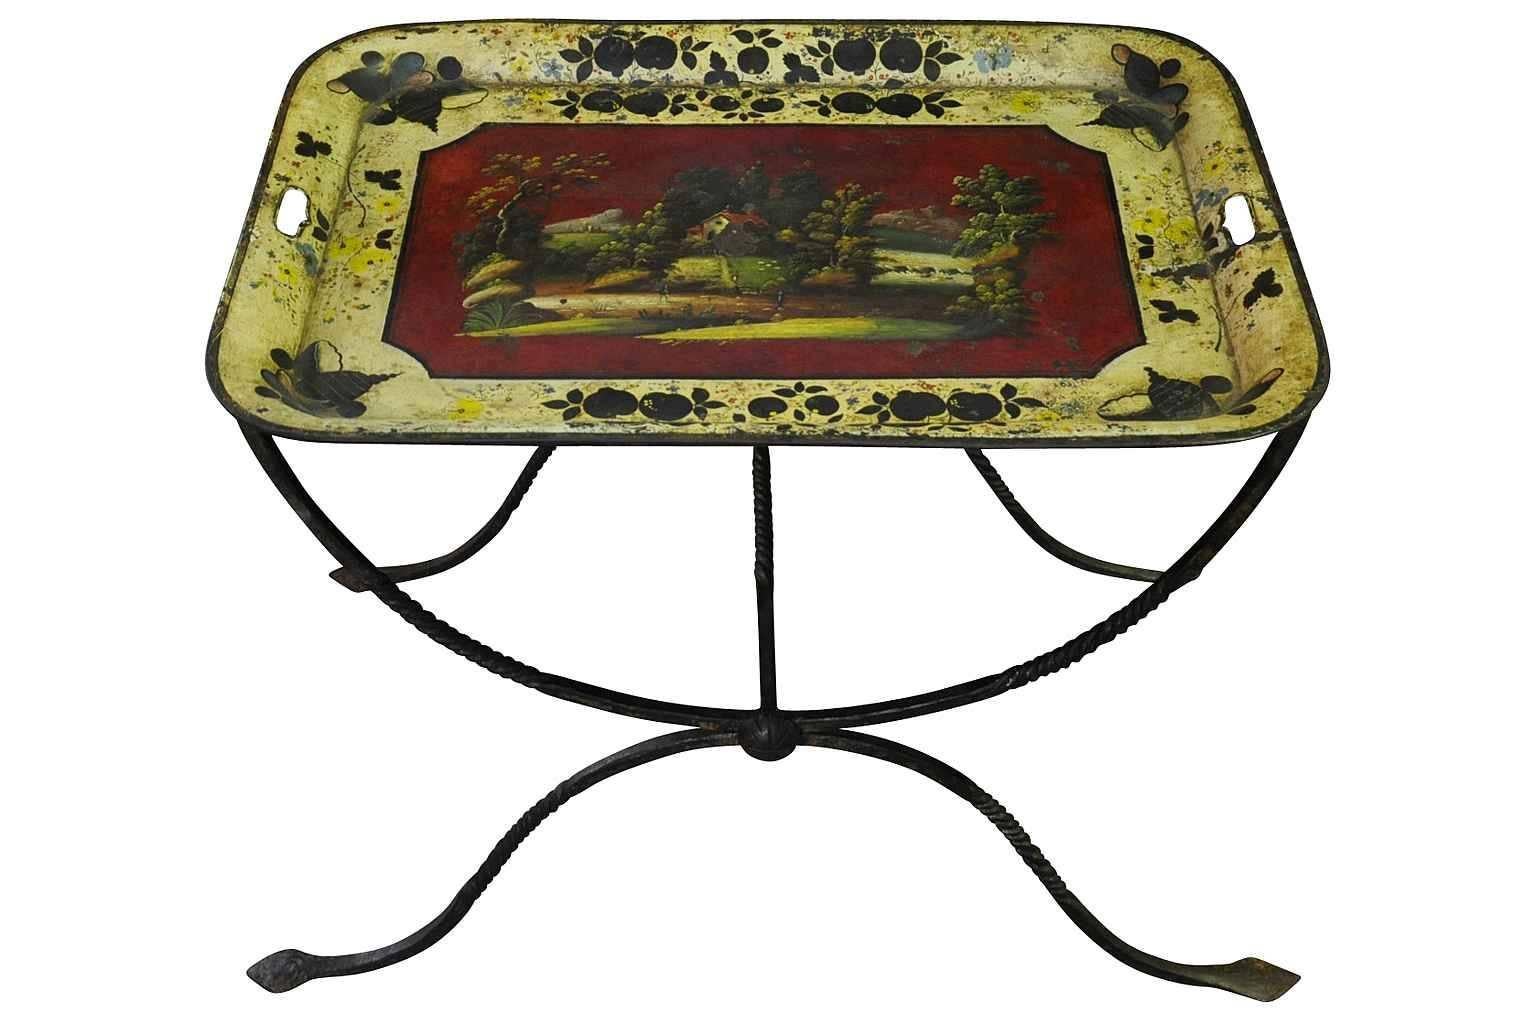 A delightful French side table composed of a very handsome wrought iron base with the removable polychromed tole tray top. I terrific accent piece giving a pop of color.